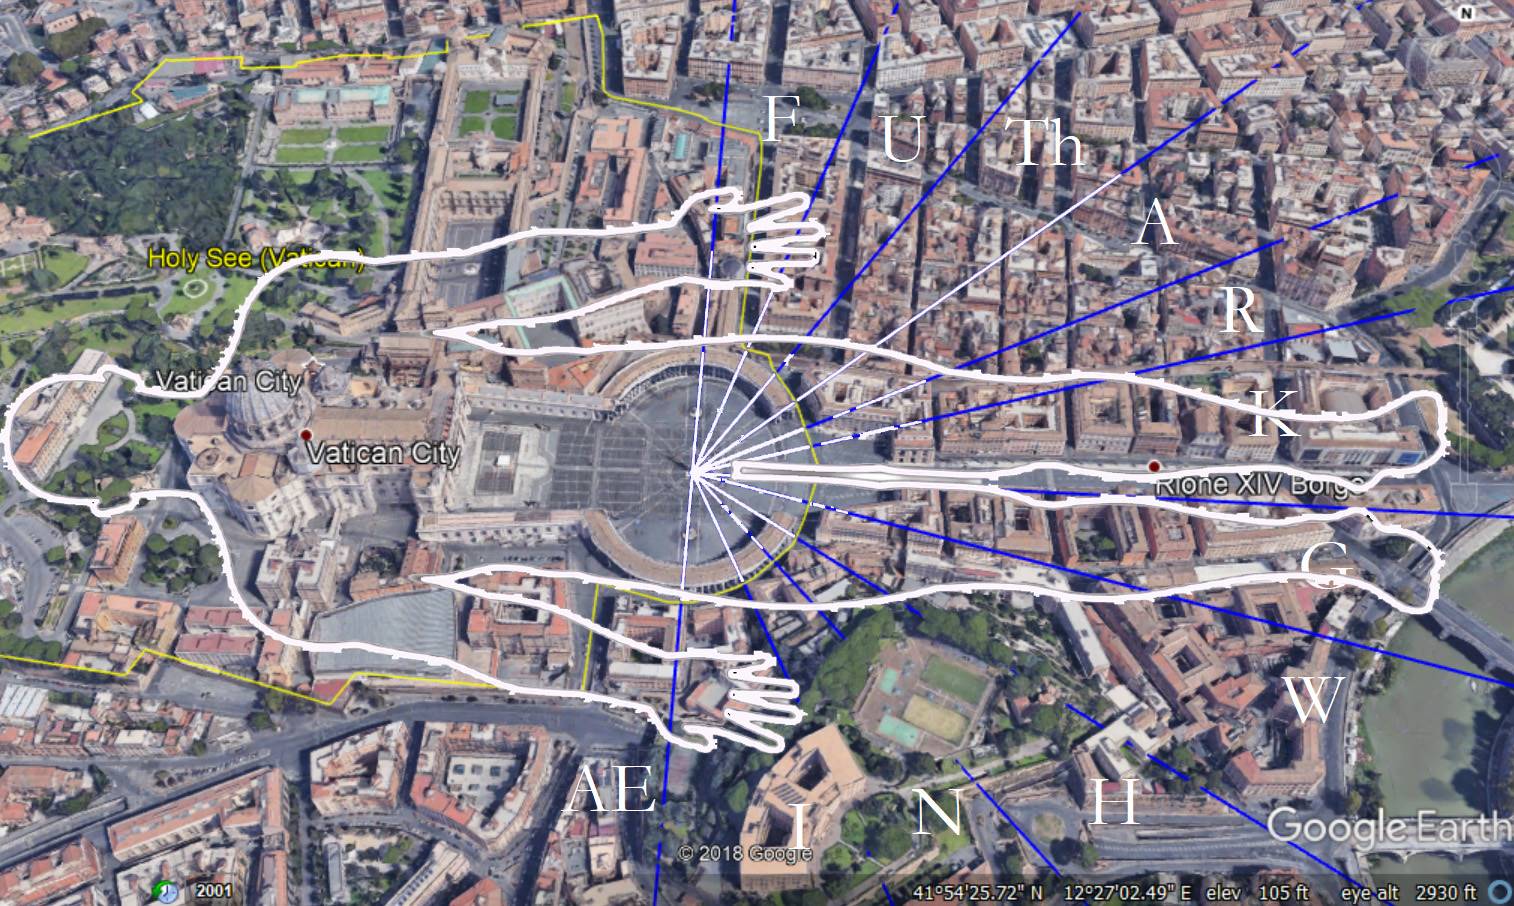 Aerial view of a city

Description automatically generated with low confidence